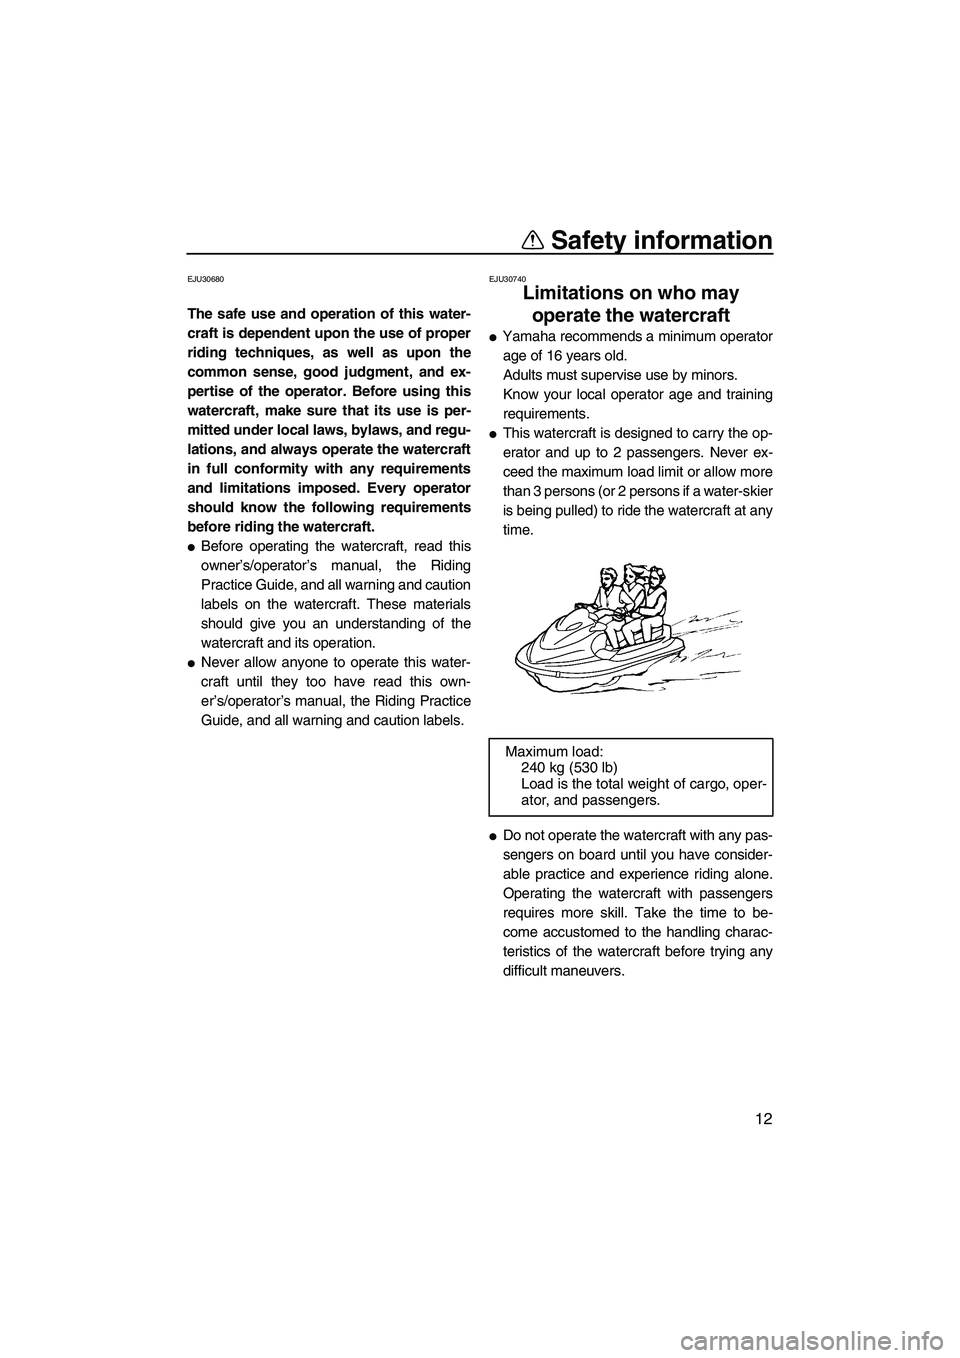 YAMAHA VX CRUISER 2007  Owners Manual Safety information
12
EJU30680
The safe use and operation of this water-
craft is dependent upon the use of proper
riding techniques, as well as upon the
common sense, good judgment, and ex-
pertise o